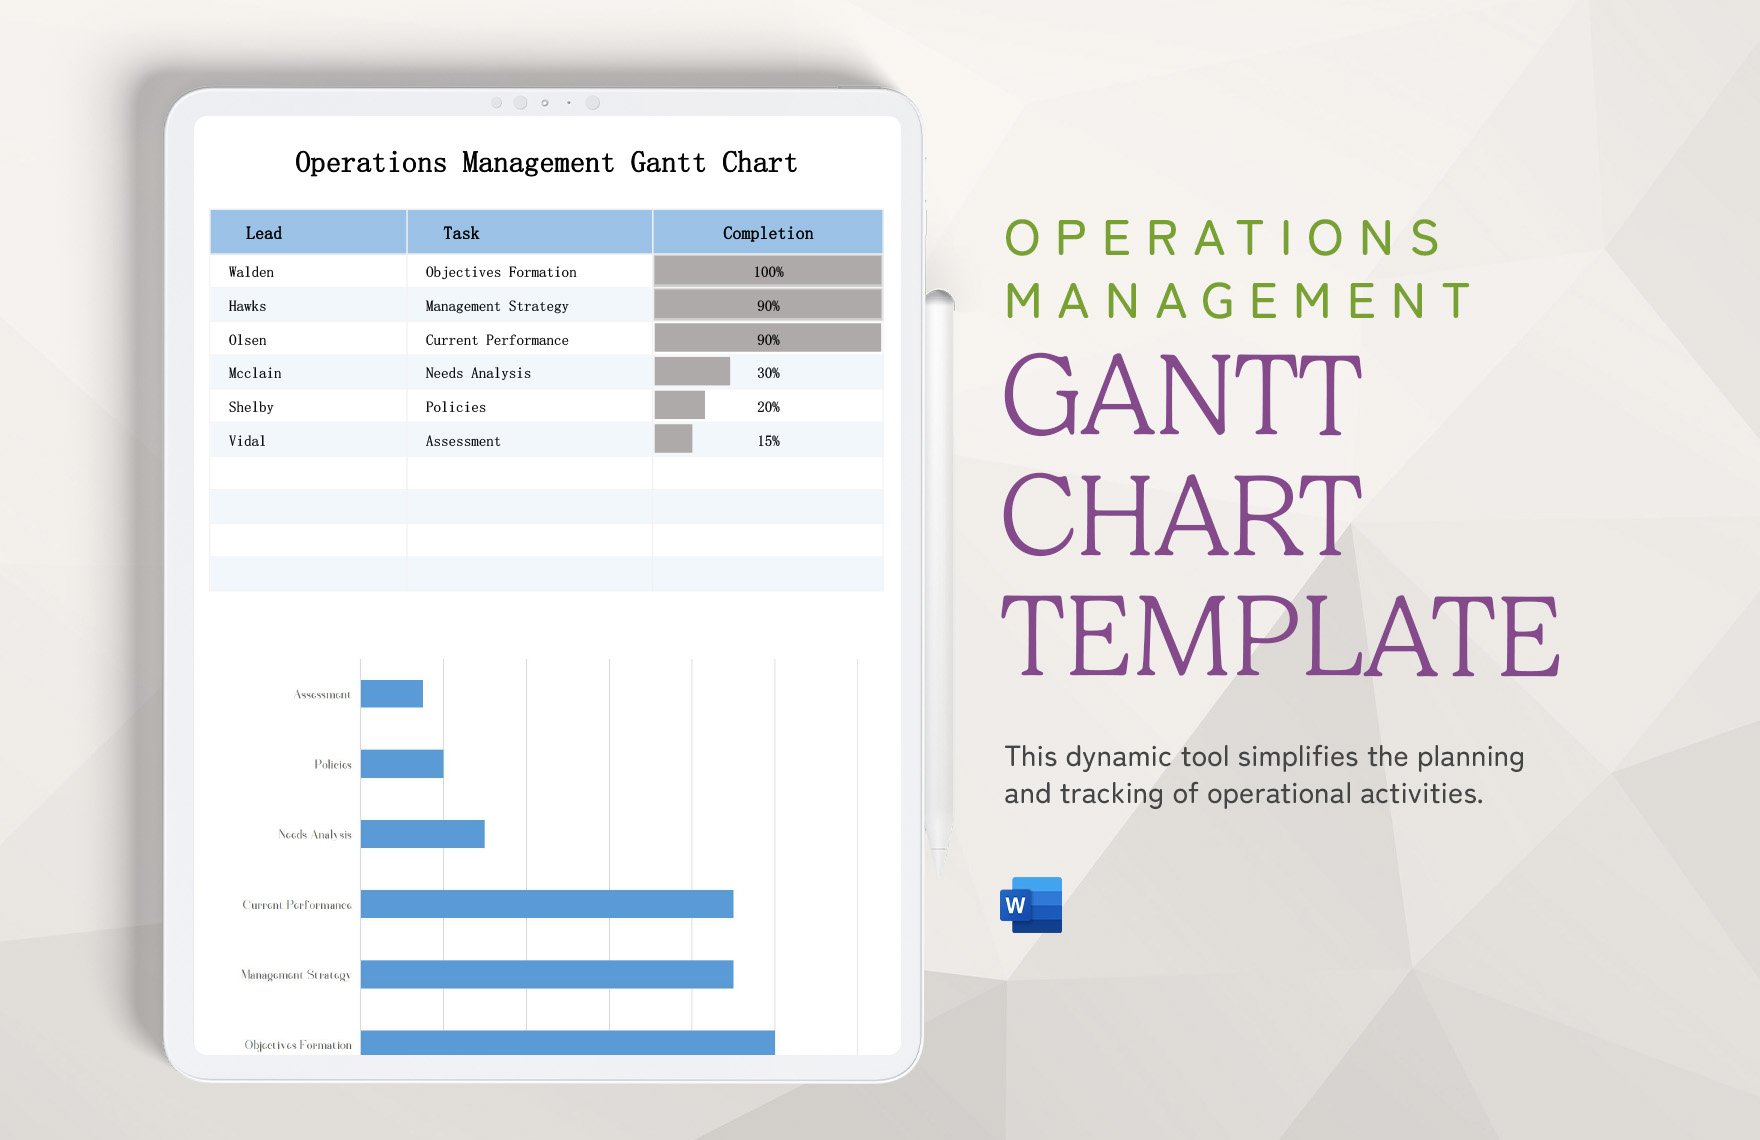 Operations Management Gantt Chart Template in Excel